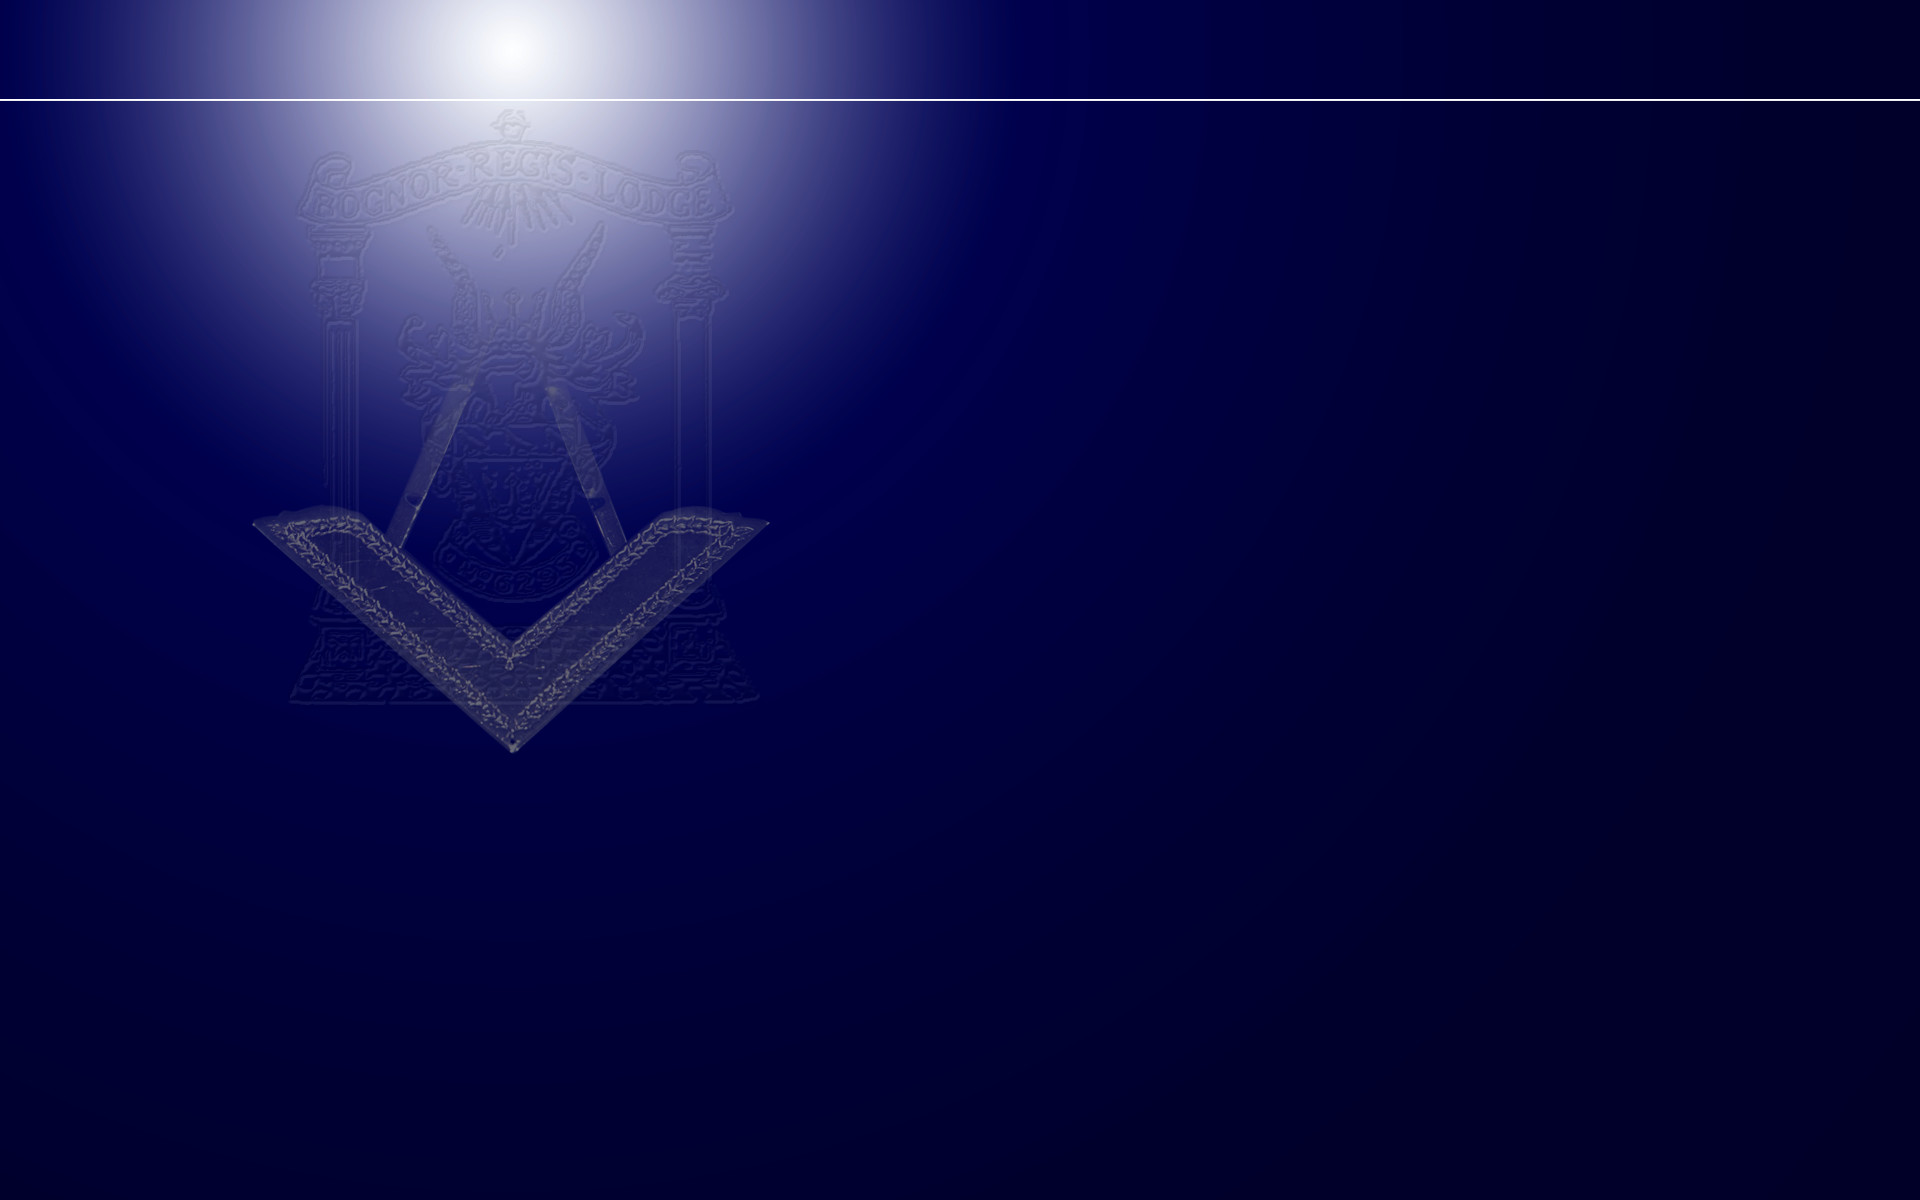 People have their own reasons why they enjoy Freemasonry